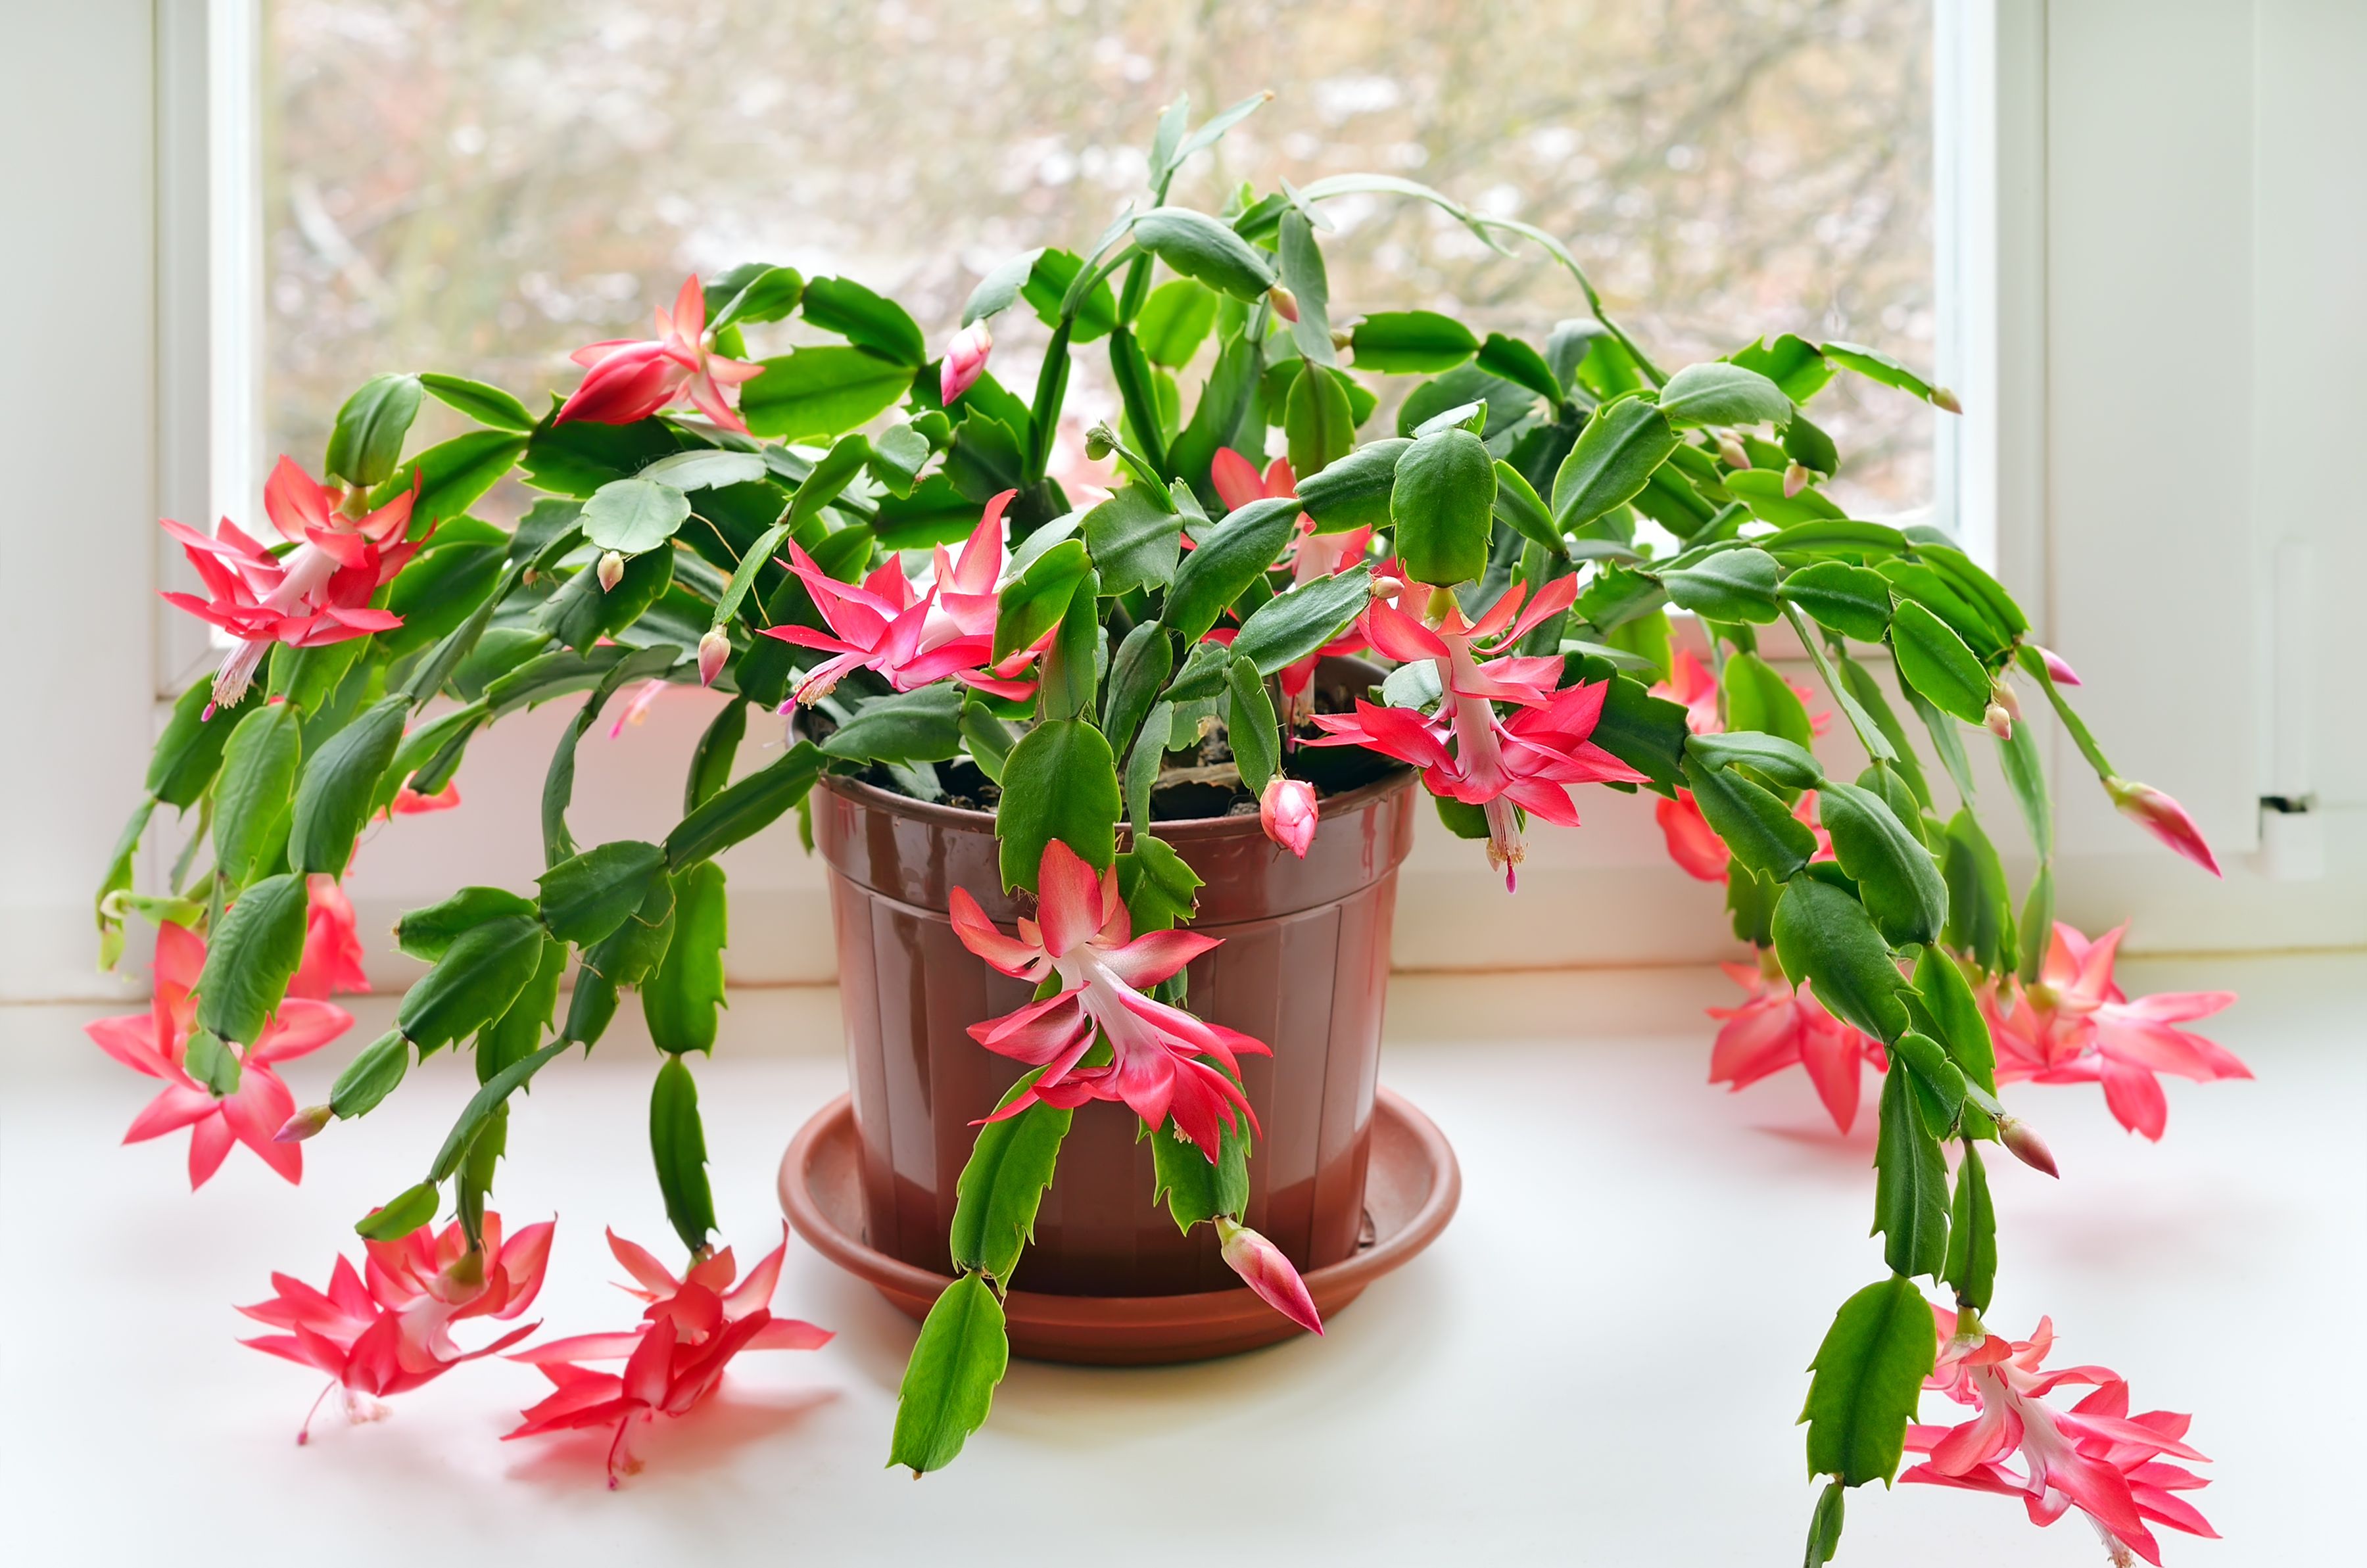 20 Christmas Plants That Will Make Your Home Feel More Festive